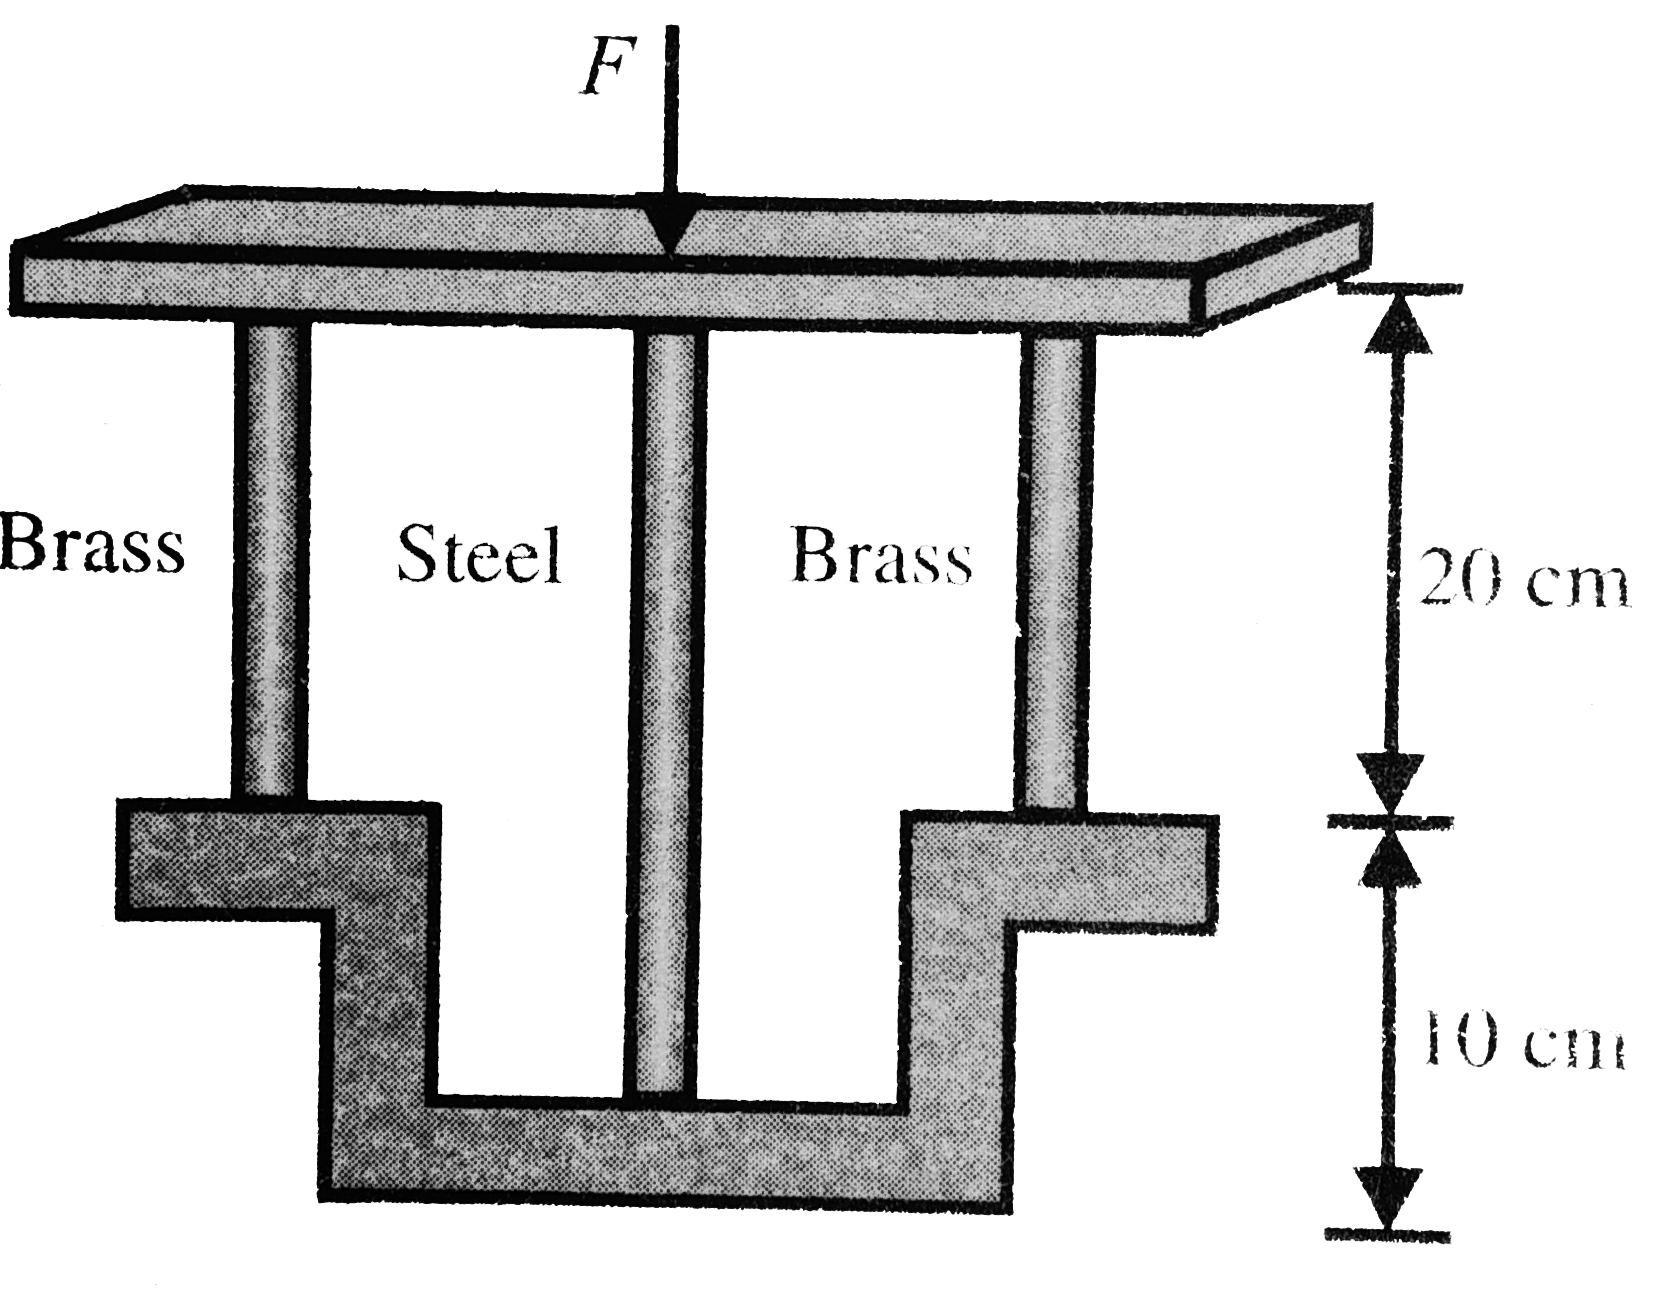 A steel rod of length l(1) = 30 cm and two identical brass rod of length l(2)= 20 cm each support a light horizontal platform as shown in Fig. Cross-sectional area of each of the three rods is A = 1 cm^(2). A vertically downward force F= 5000 N is applied on the platform. Young's modulus of elasticity for steel Y(s)=2xx10^(11)Nm^(-2) and brass Y(b) = 1 xx 10^(11) Nm^(-2). Find stress (in MPa) developed in a. Steel rod b. Brass rod